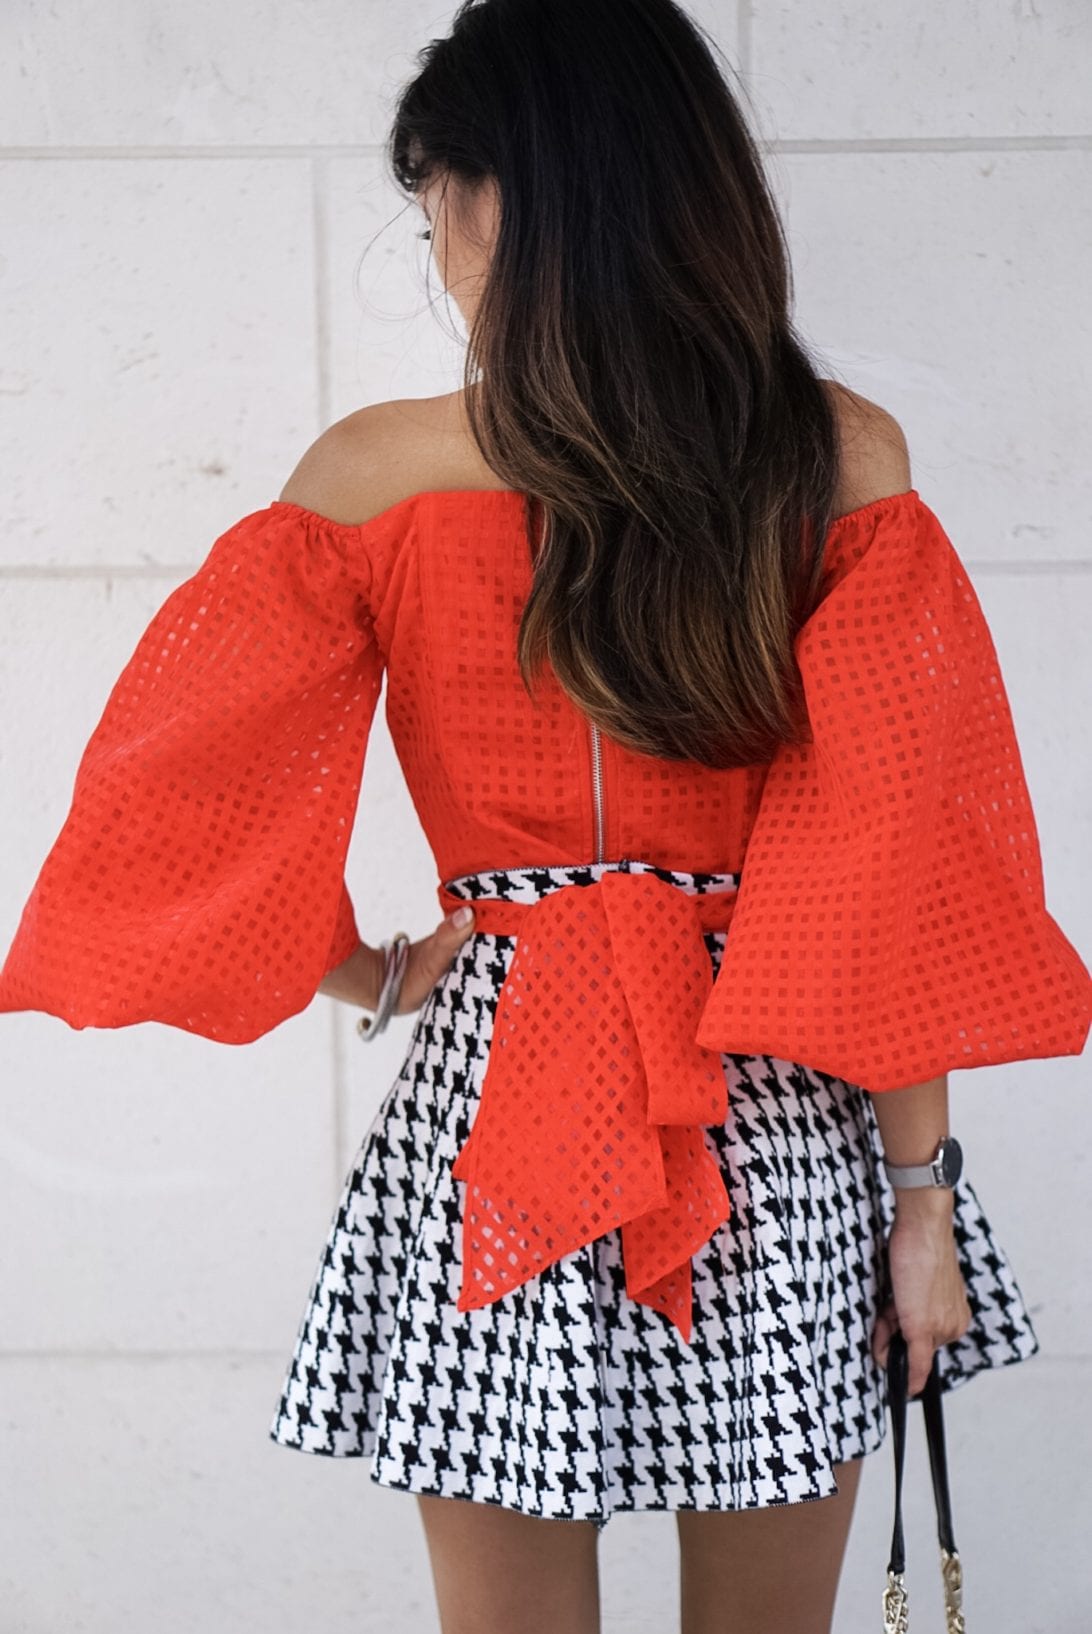 RED OFF THE SHOULDER BASKET WEAVE TOP WITH BOW TIE WAIST, houndstooth skirt, puff sleeves, love cross body bag, flap bag, 